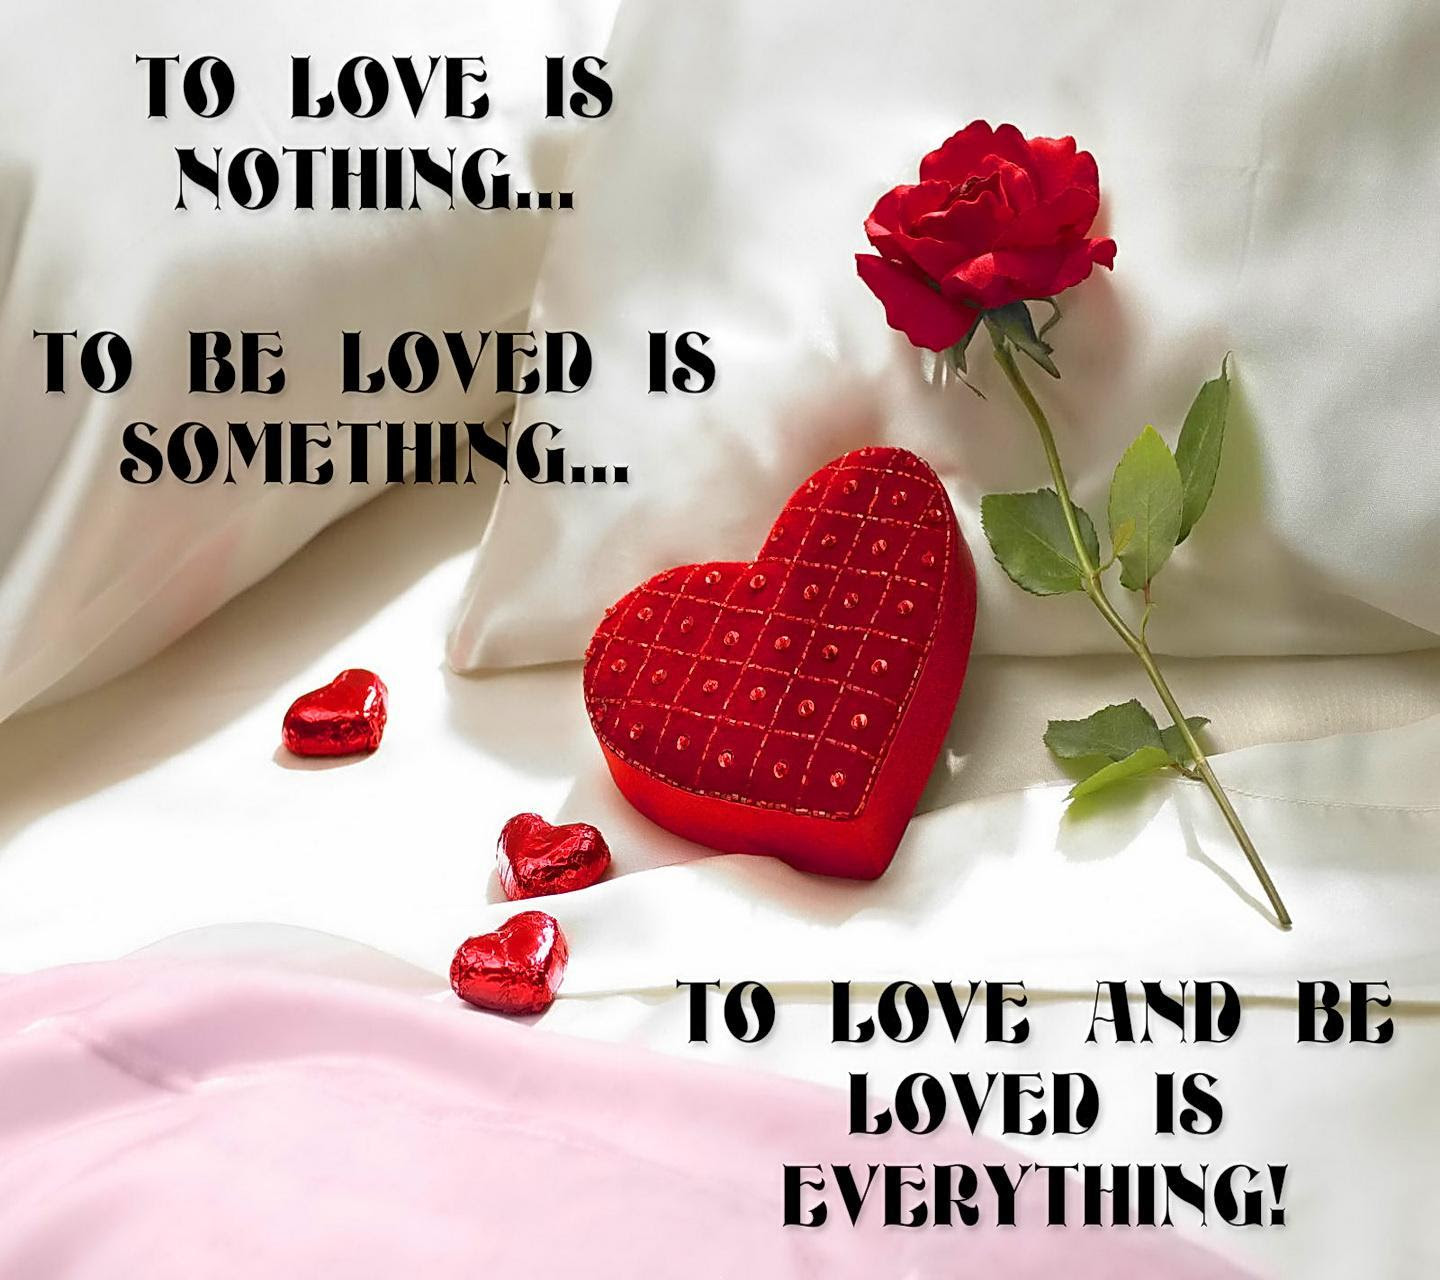 Love quote hd wallpaper for lovers